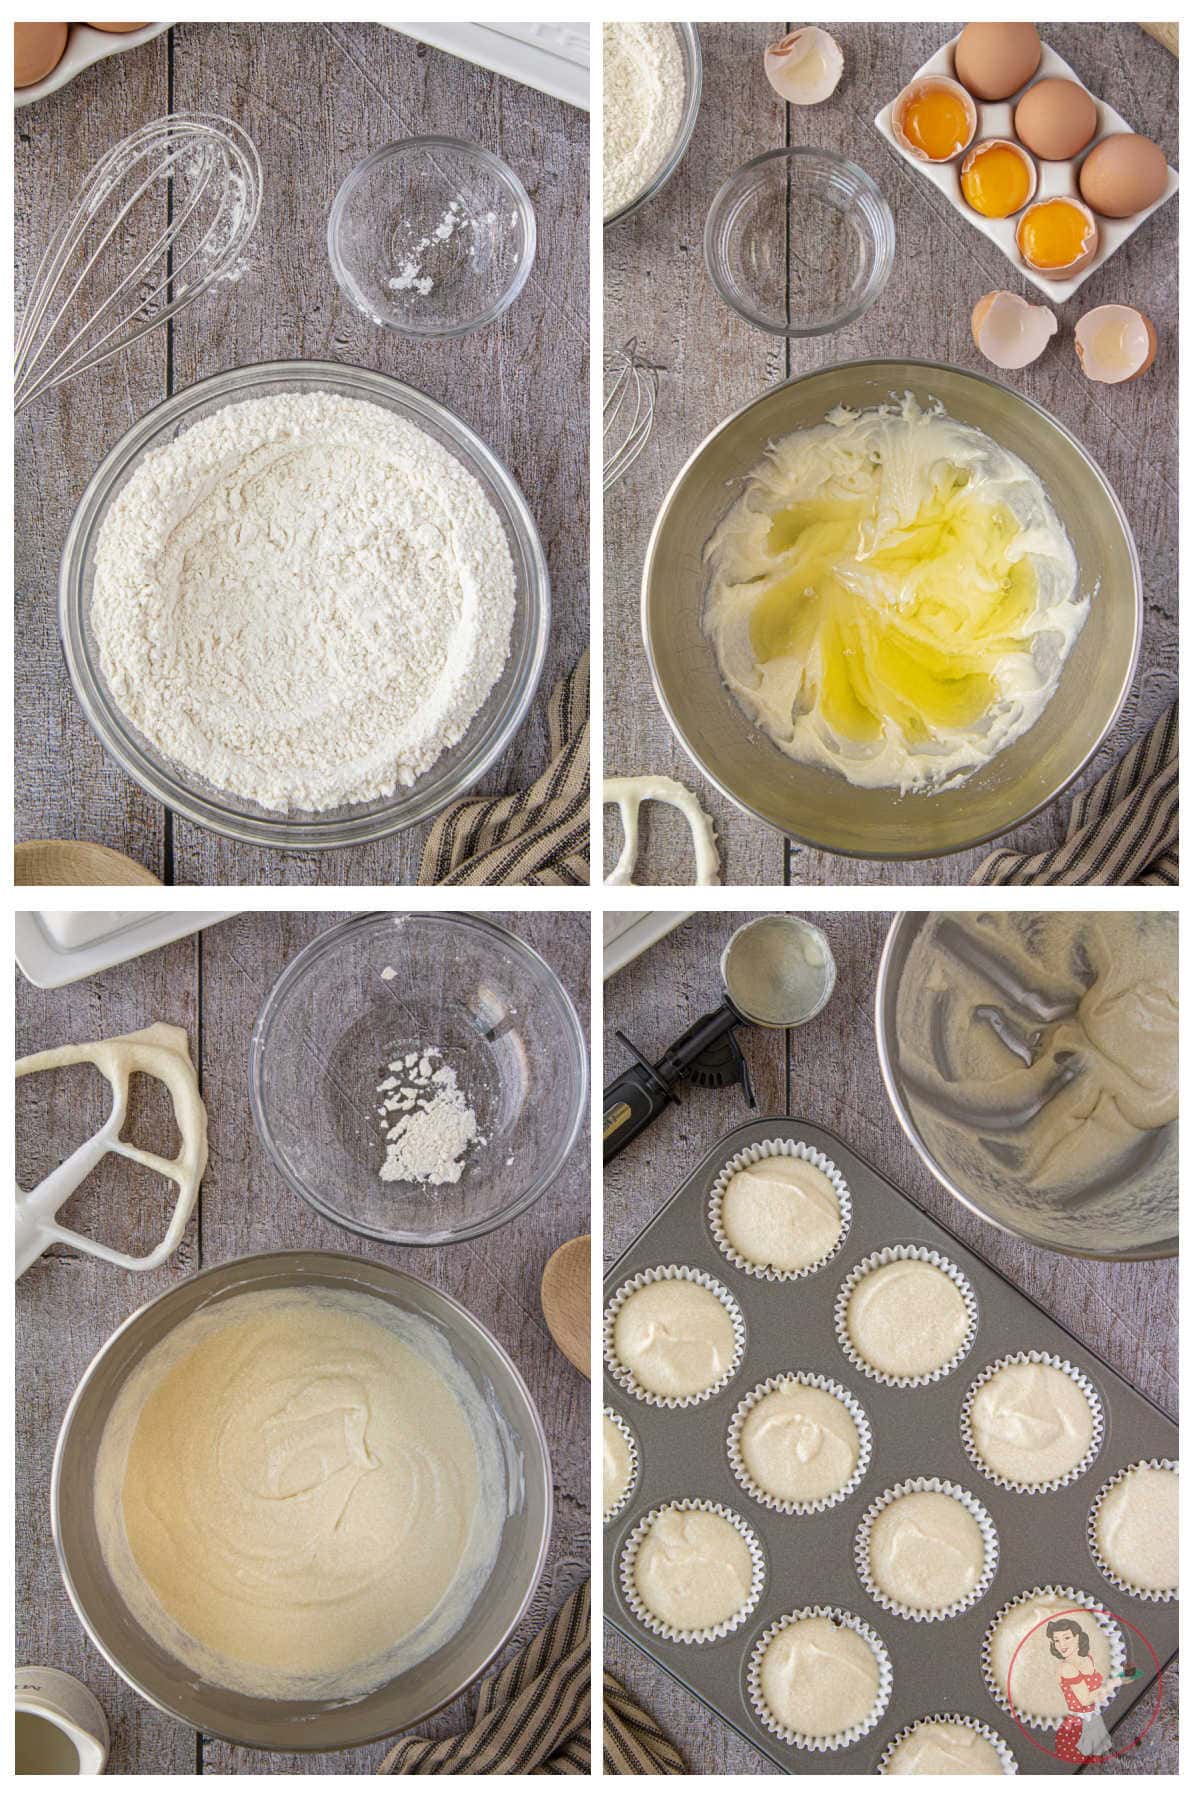 Step by step images showing how to make the cupcake batter.